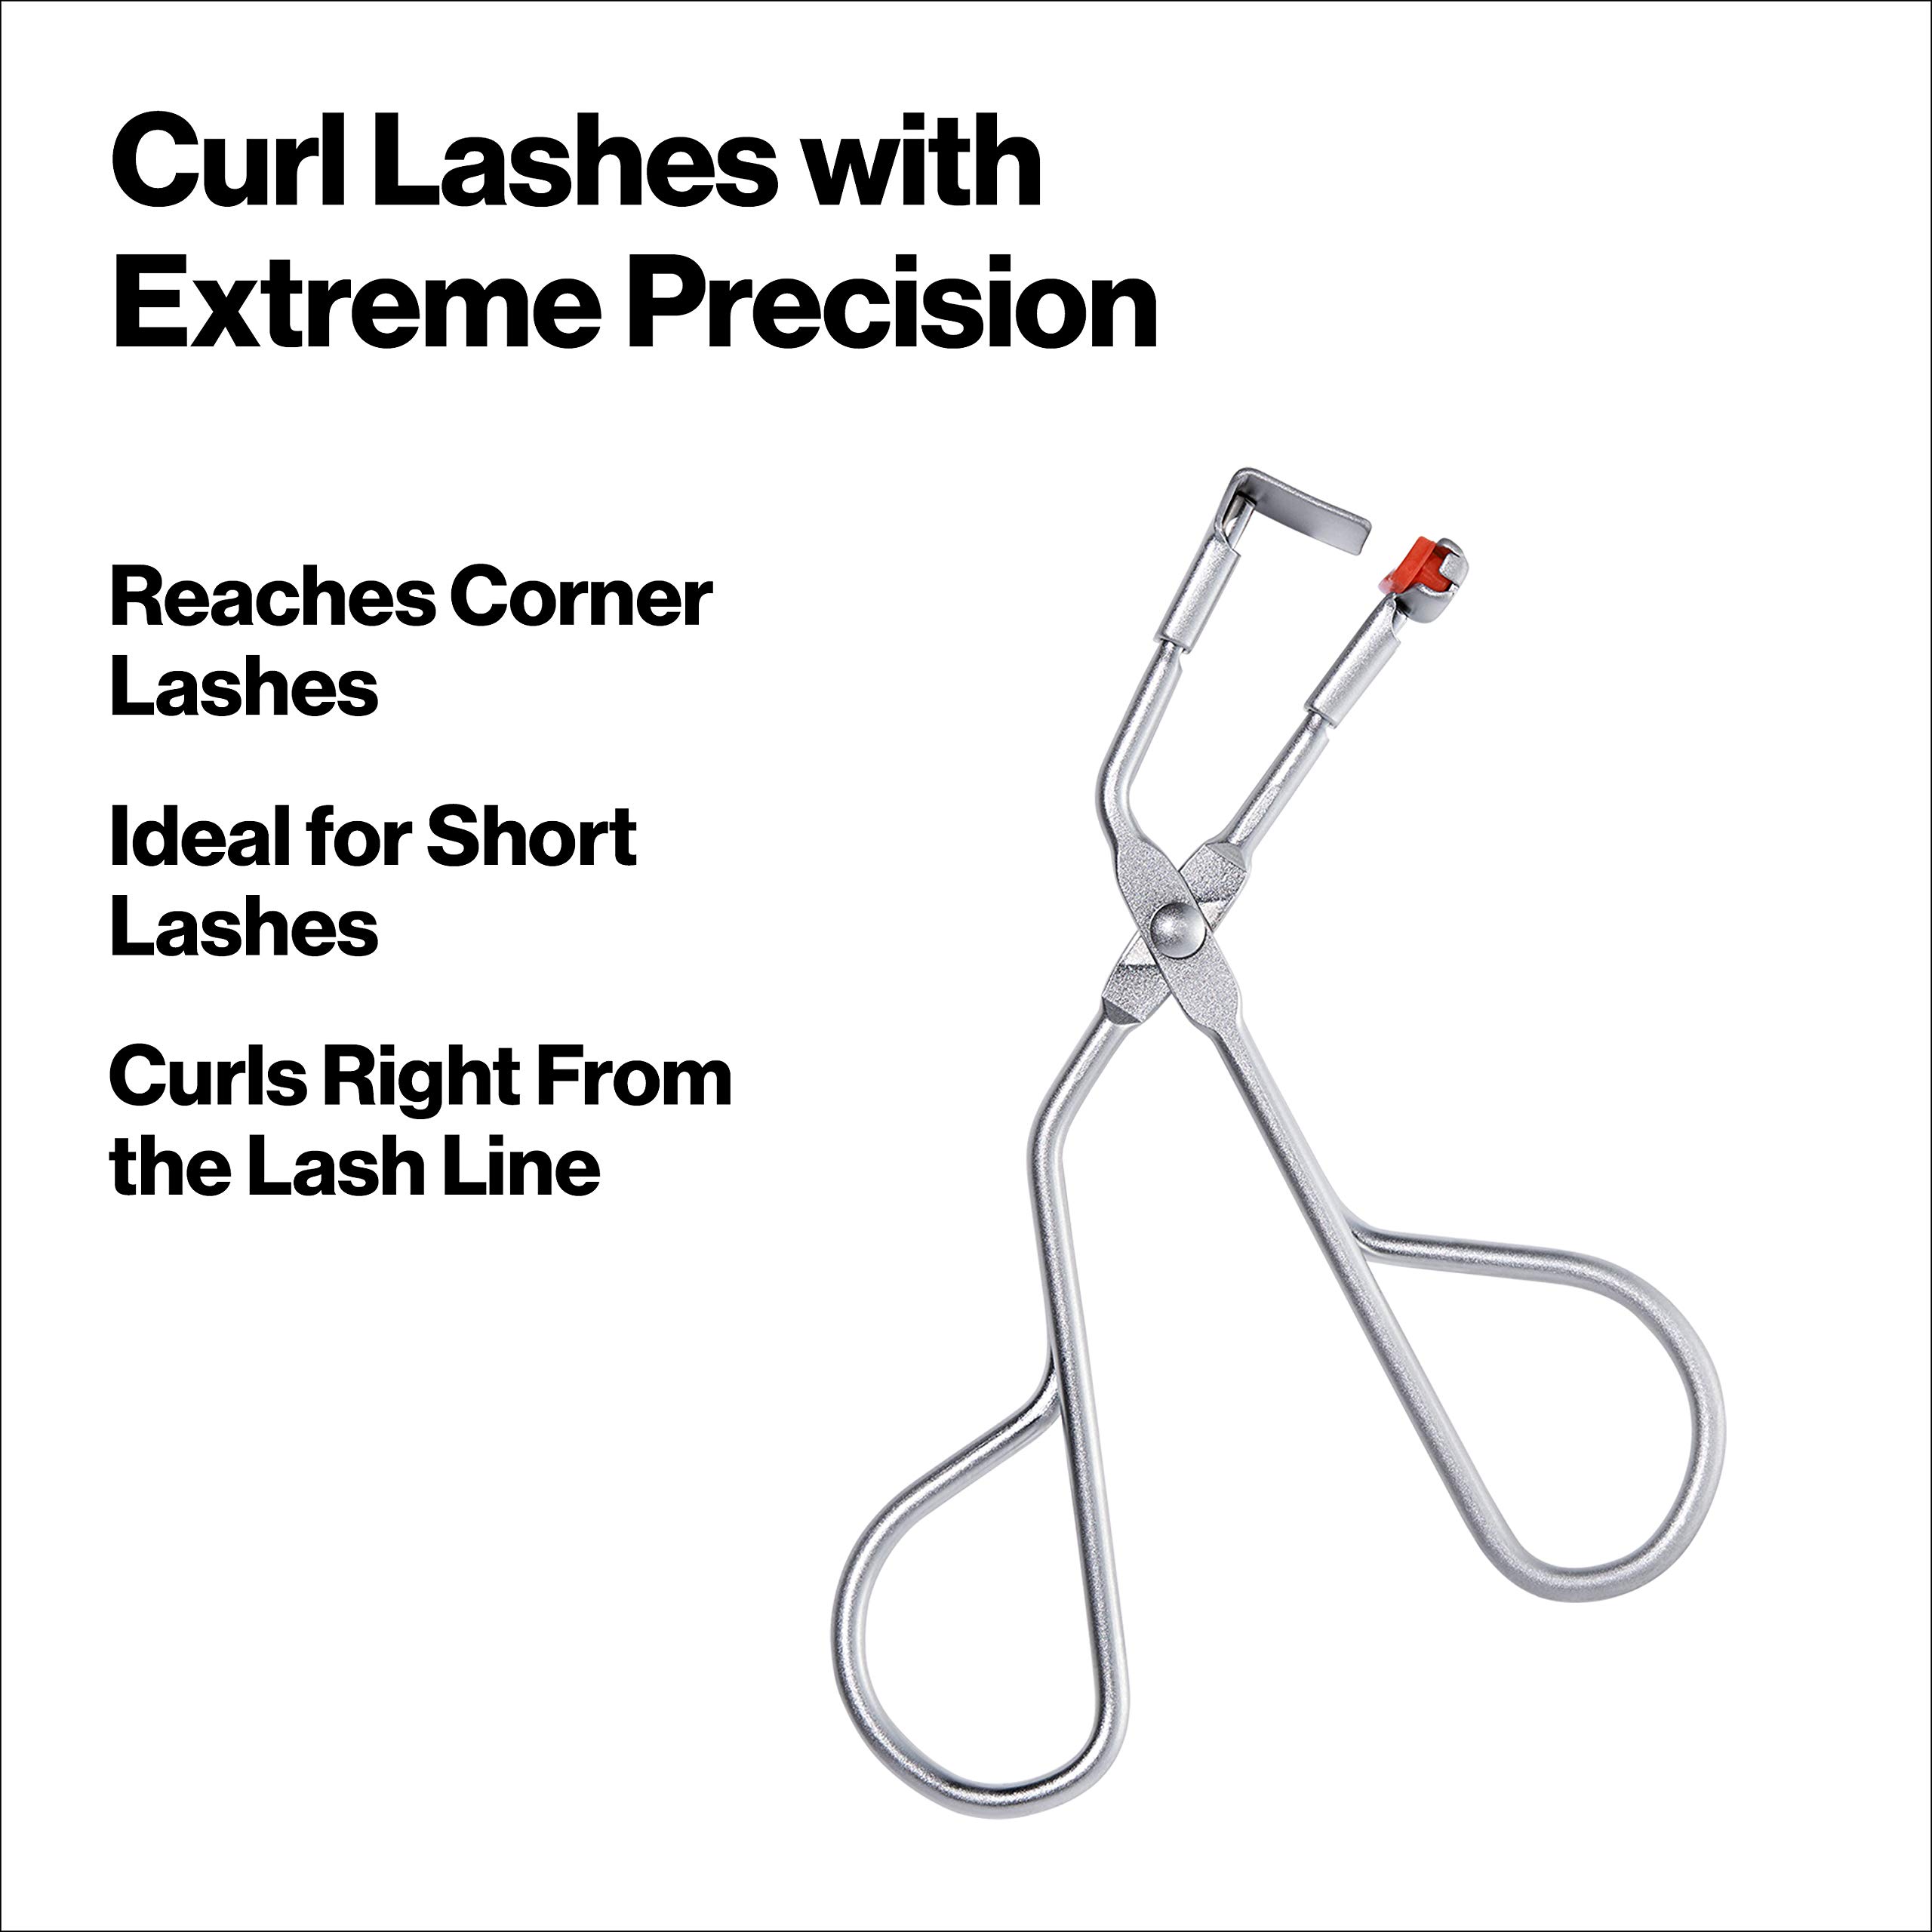 Revlon Eyelash Curler, Precision Curl Control for Short Lashes, Lifts & Defines, Easy to Use (Pack of 1)